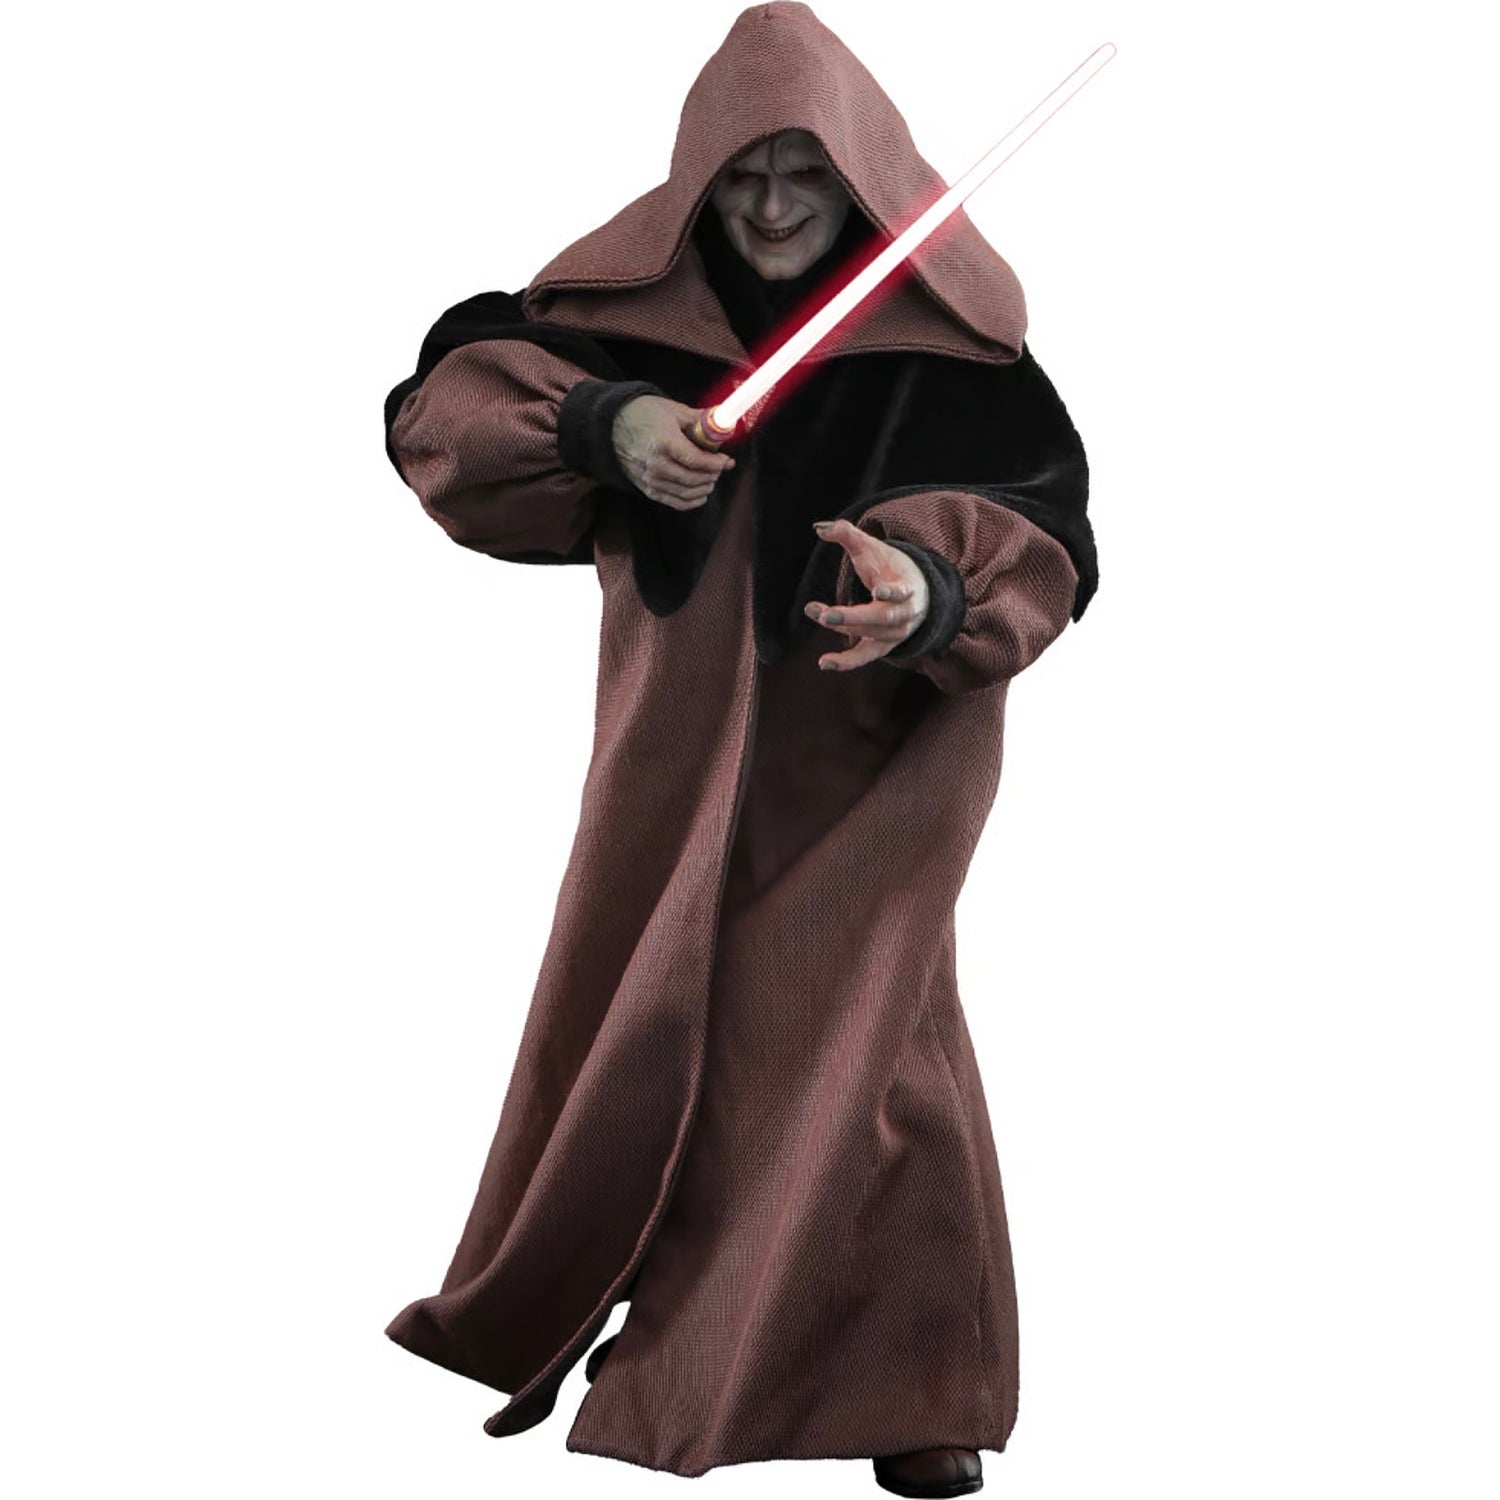 Hot Toys Star Wars Revenge of the Sith Darth Sidious 1:6 Scale Statue (29cm)